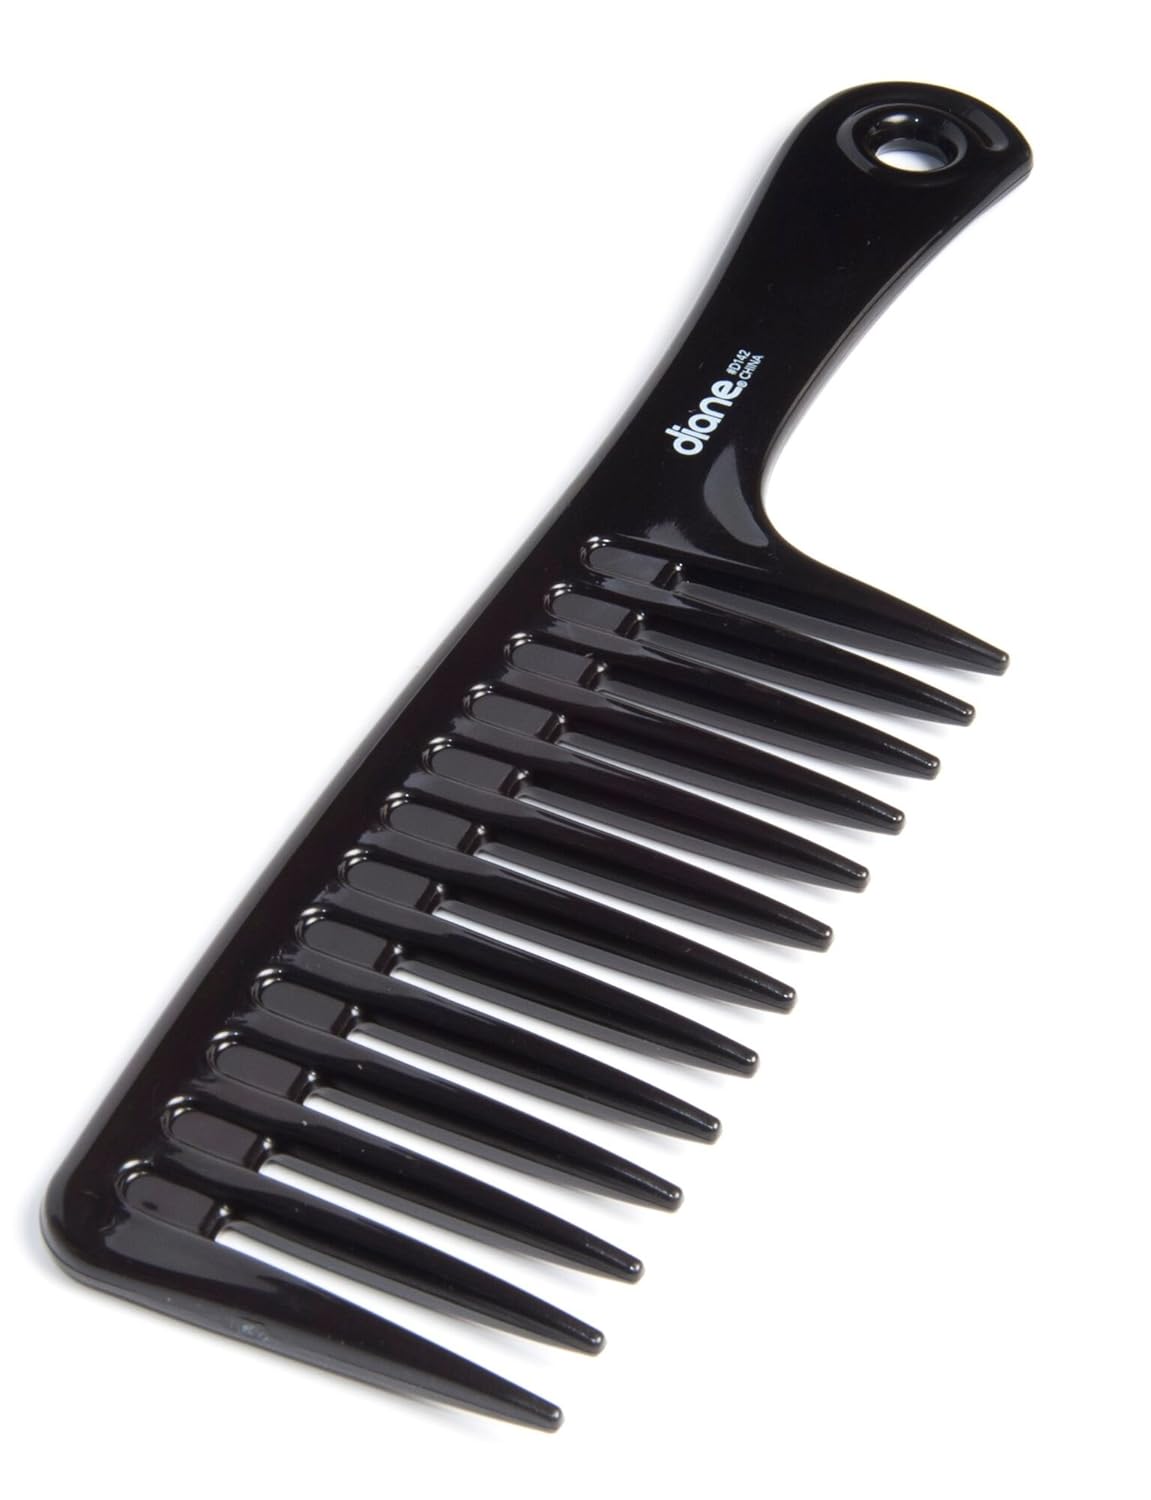 Diane shampoo comb, 9-3/4", D142 : Hair Combs : Beauty & Personal Care